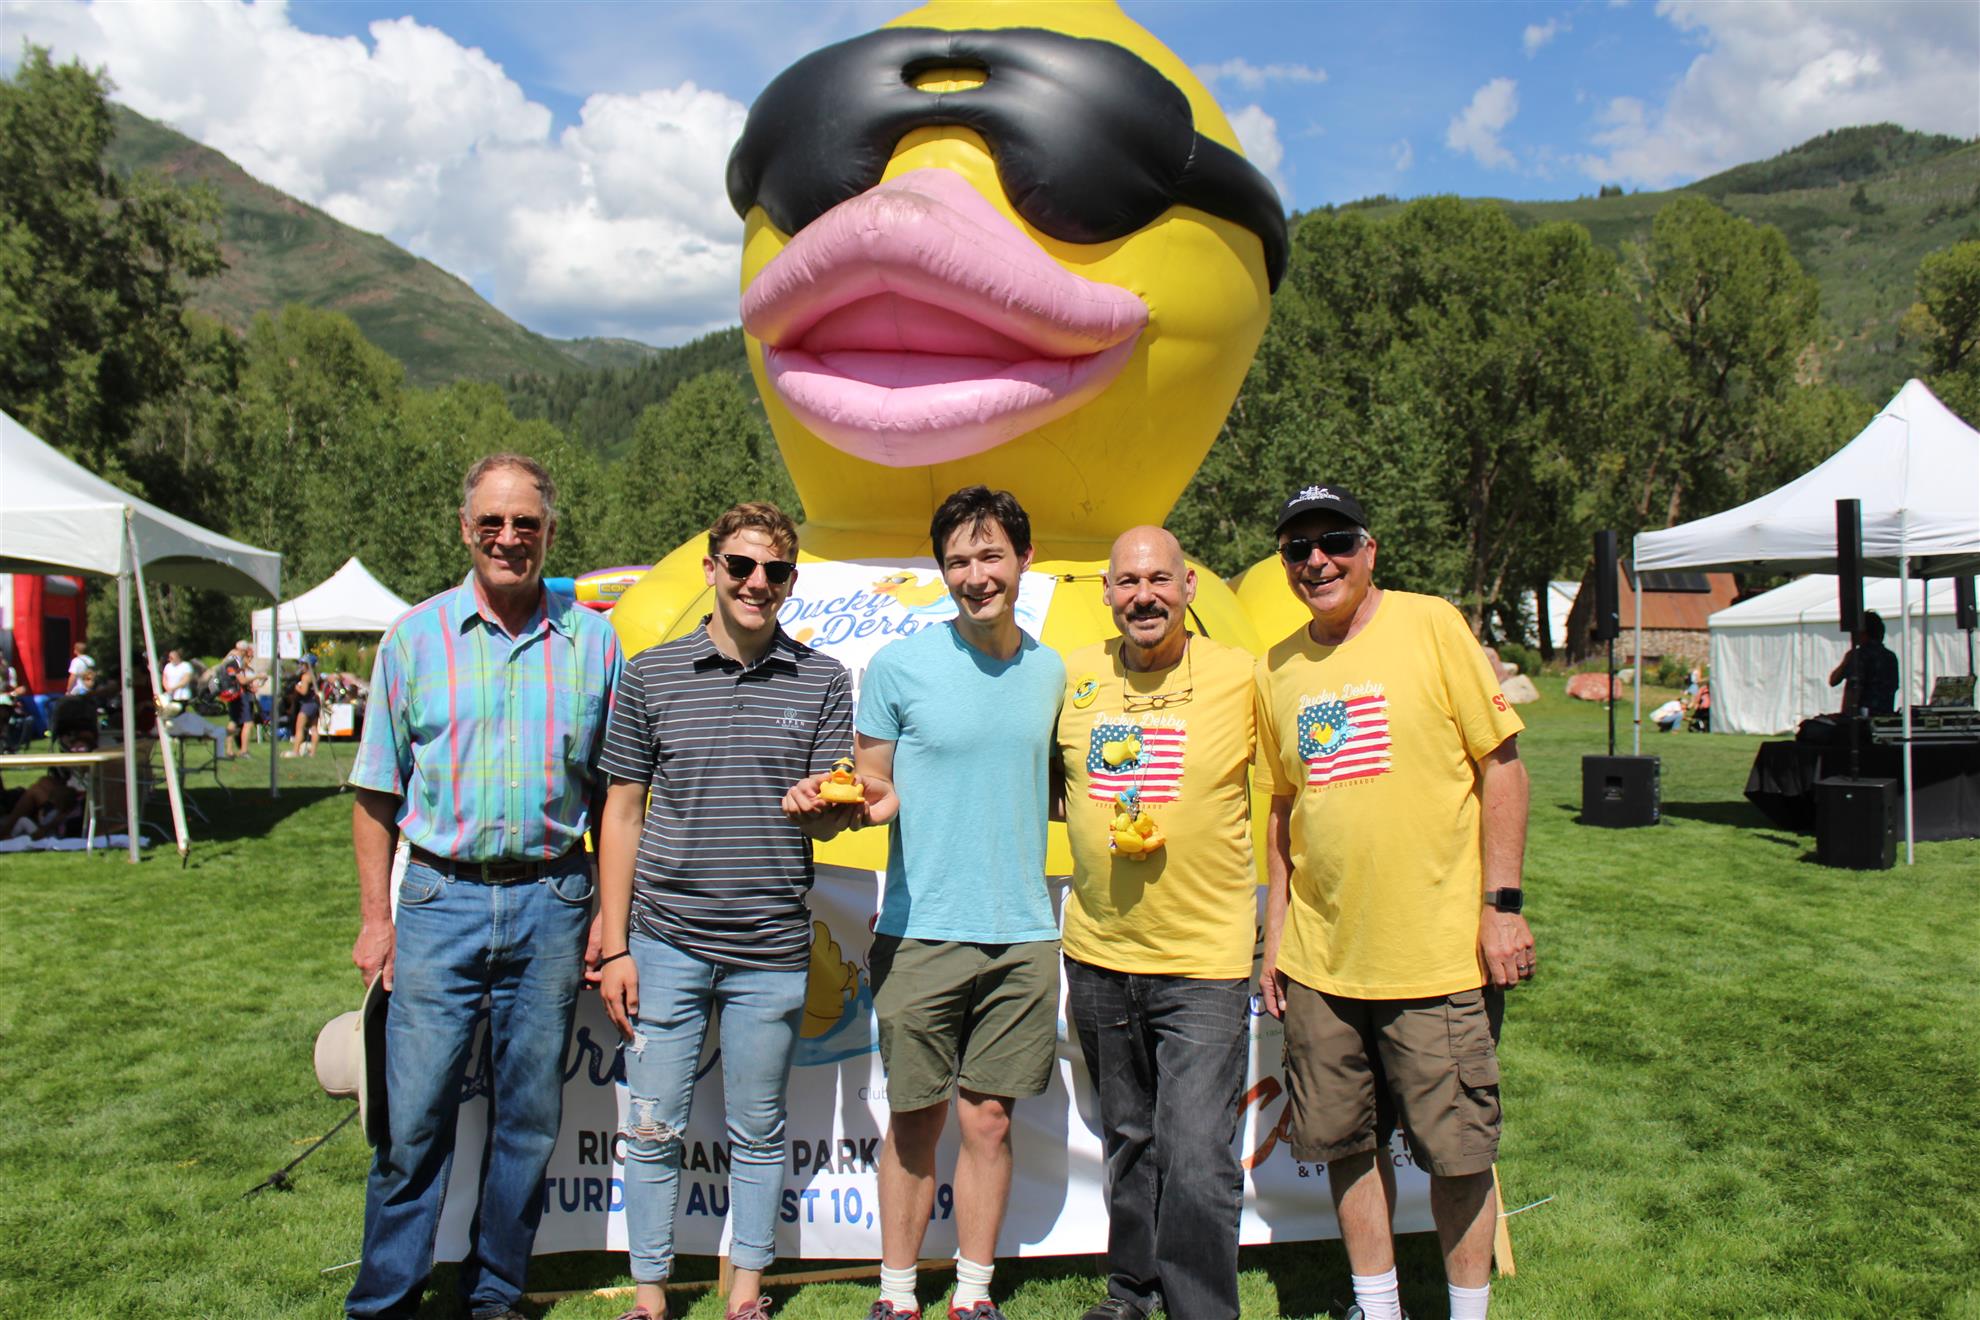 The Ducky Derby Rotary Club of Aspen